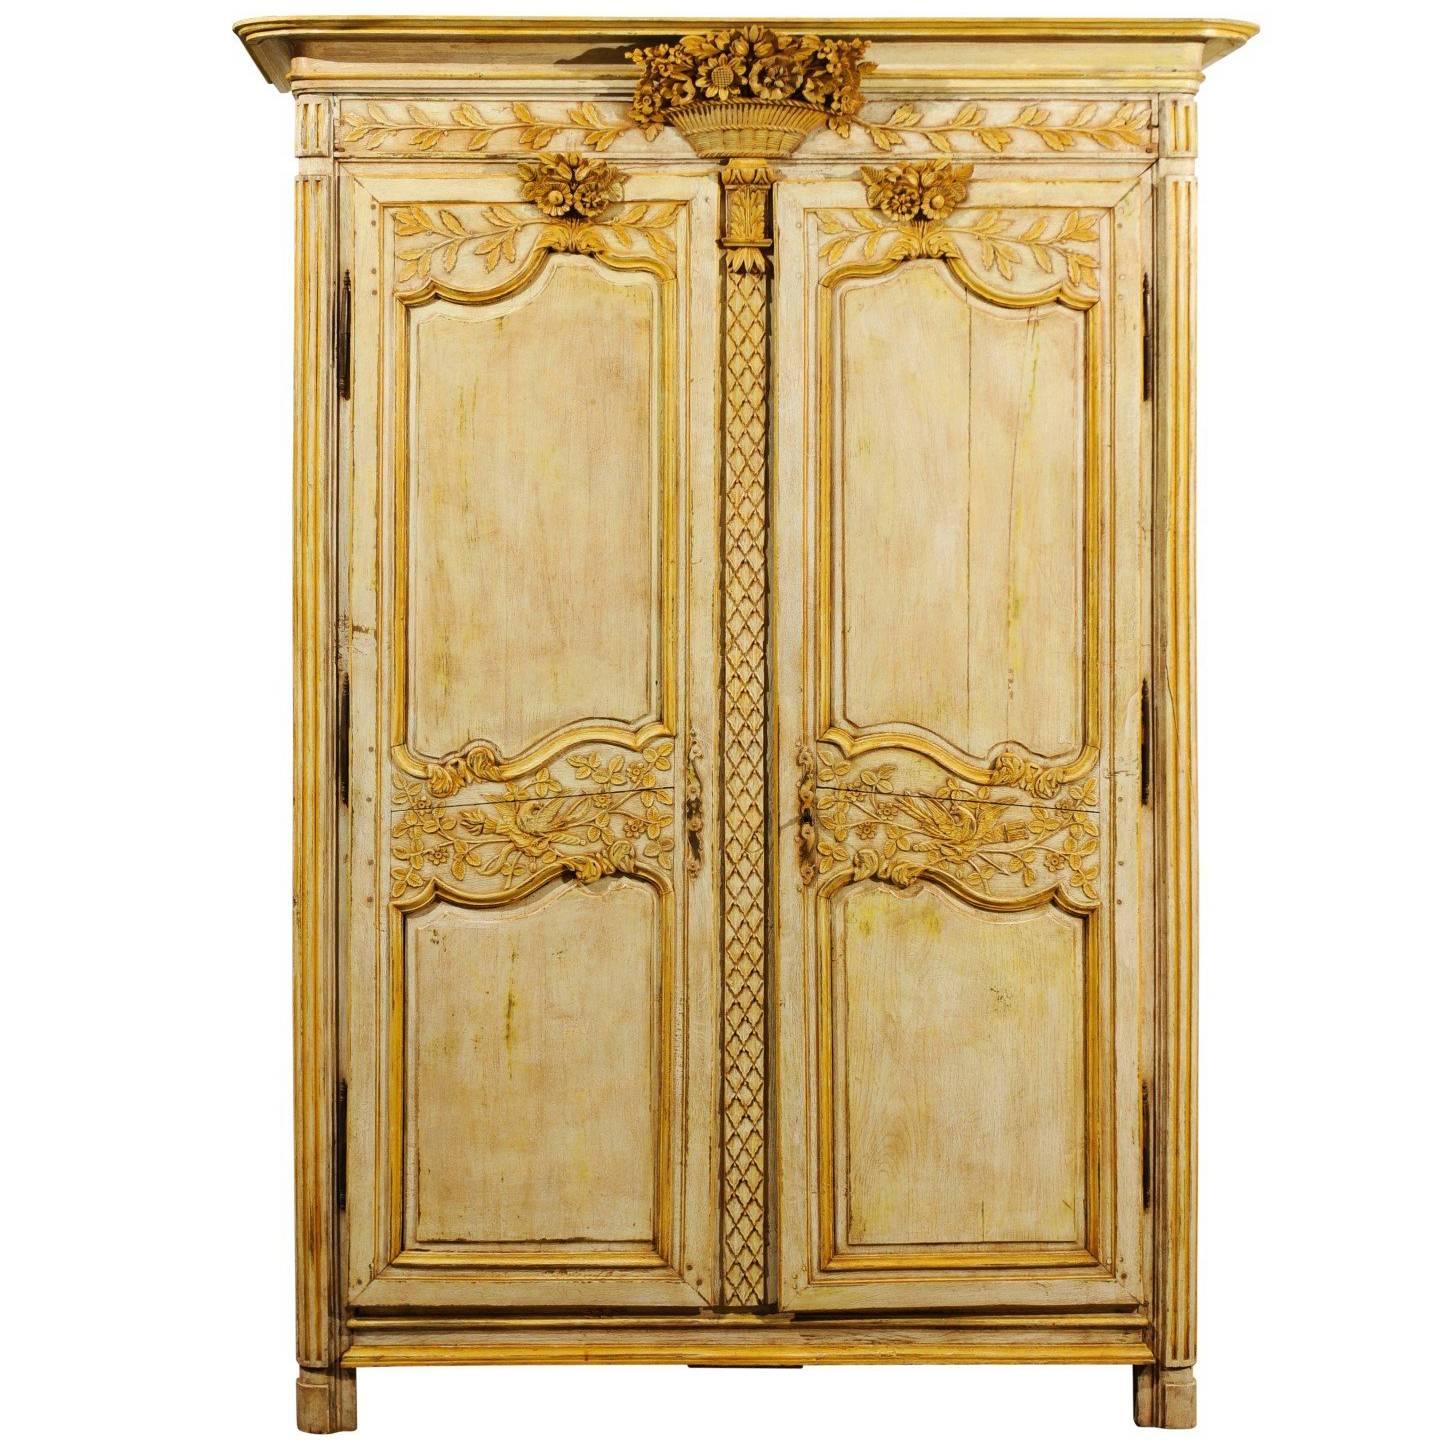 French Mid-18th Century Transition Painted Armoire with Floral Carved Cornice